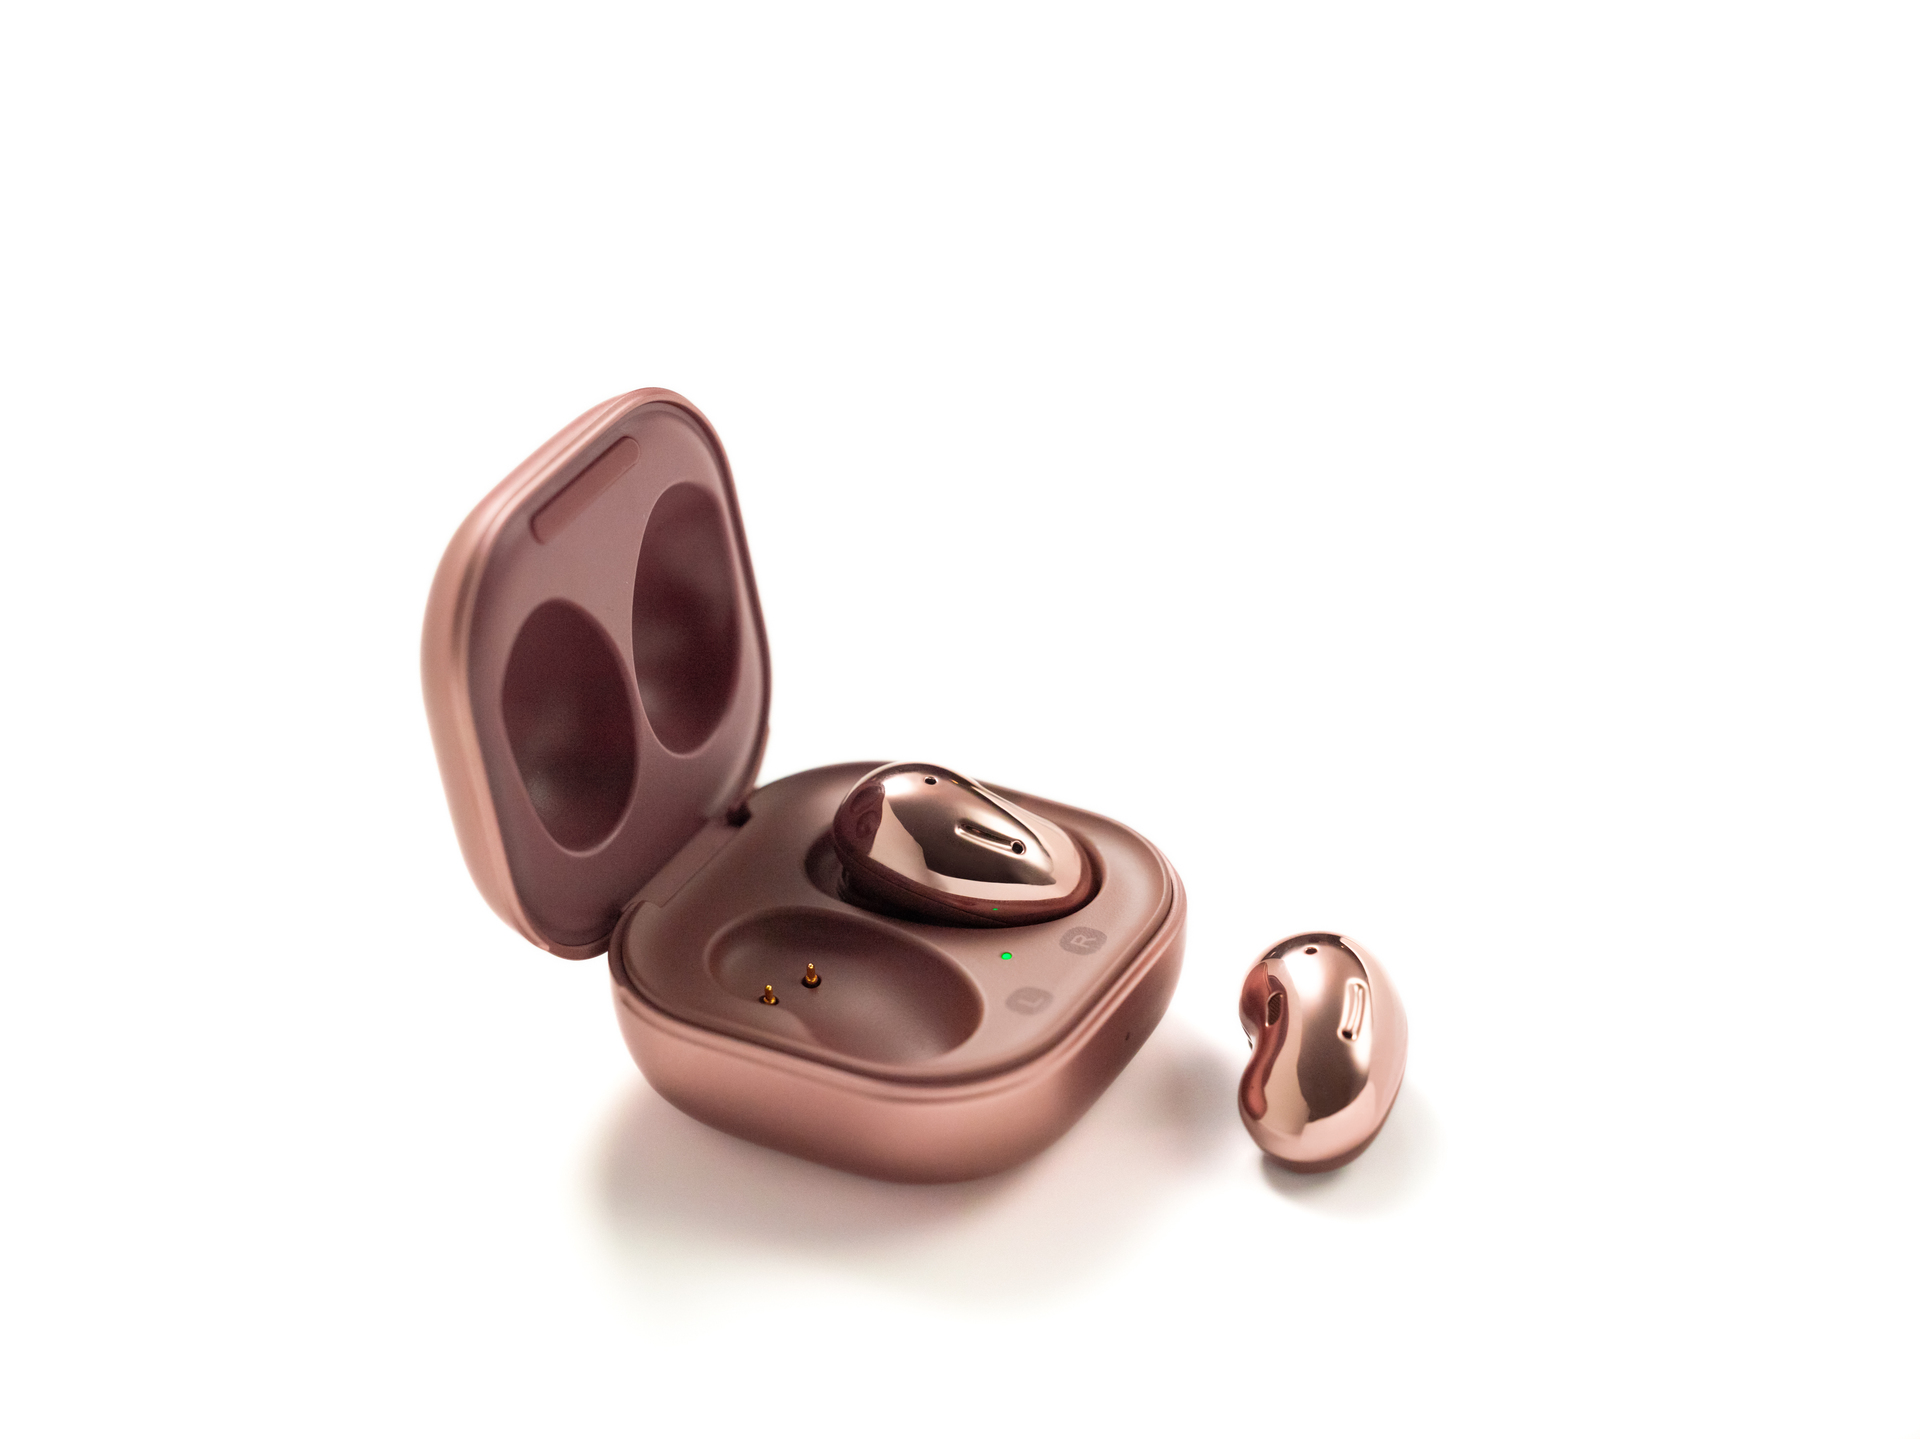 A picture of the Samsung Galaxy Buds Live Mystic Bronze case open with one earbud outside of the case against a white background.